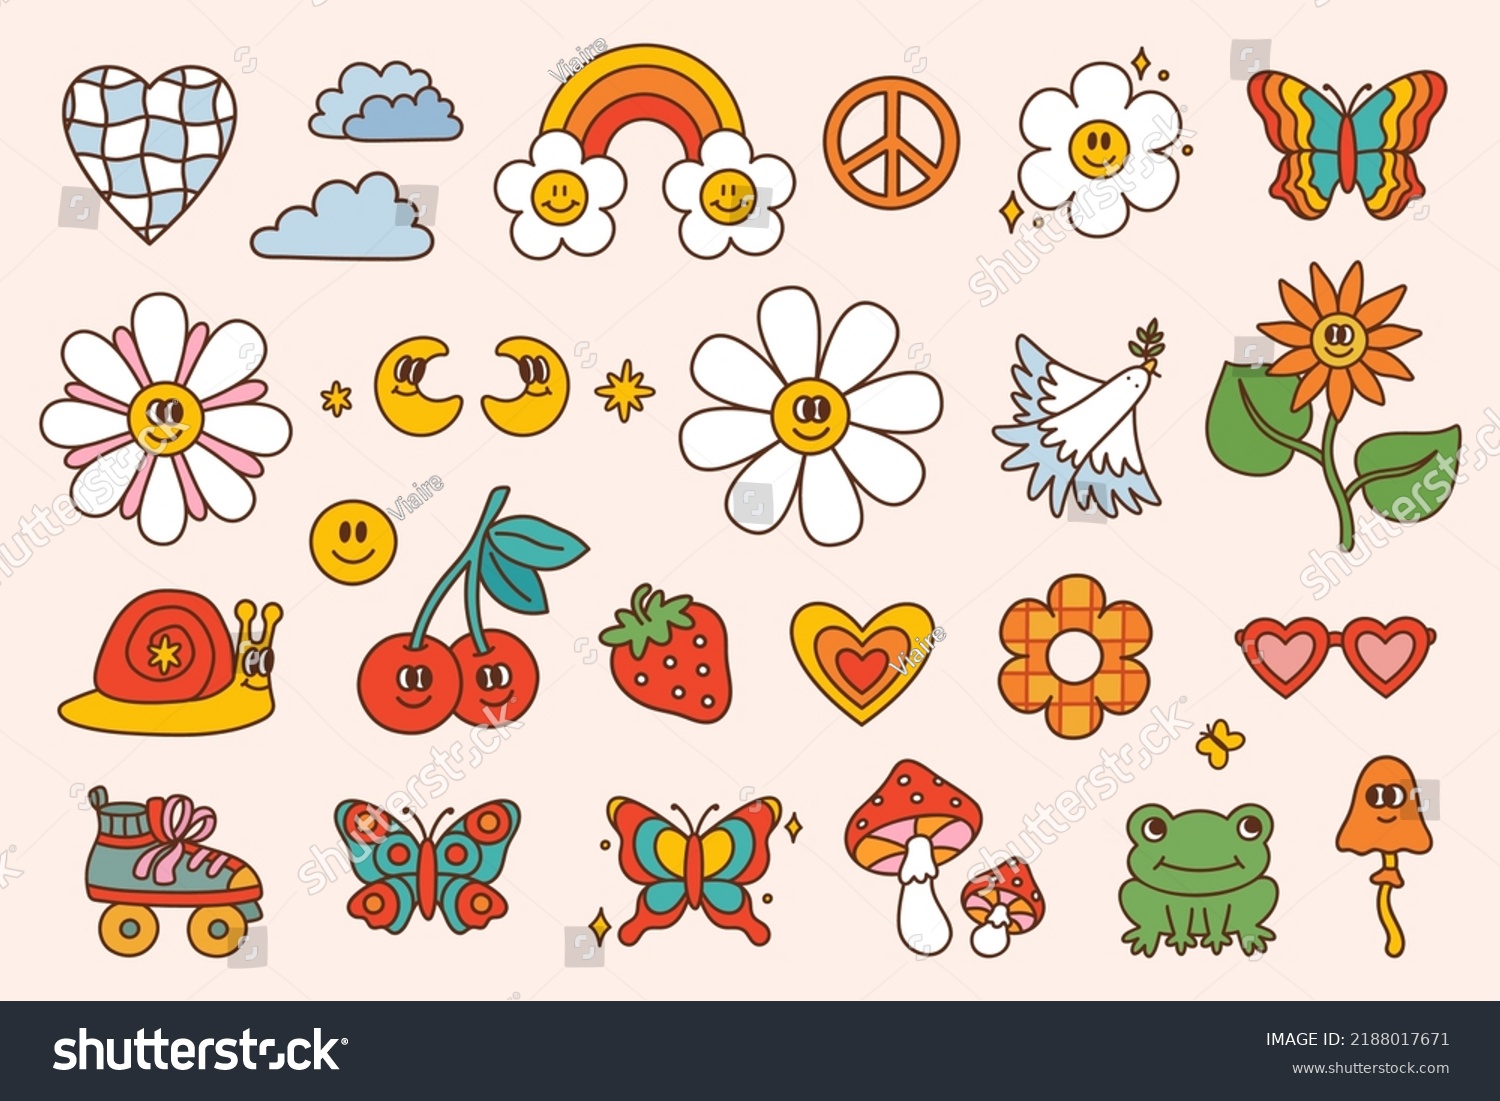 Retro Set Groovy Elements Colorful Vector Stock Vector (Royalty Free ...